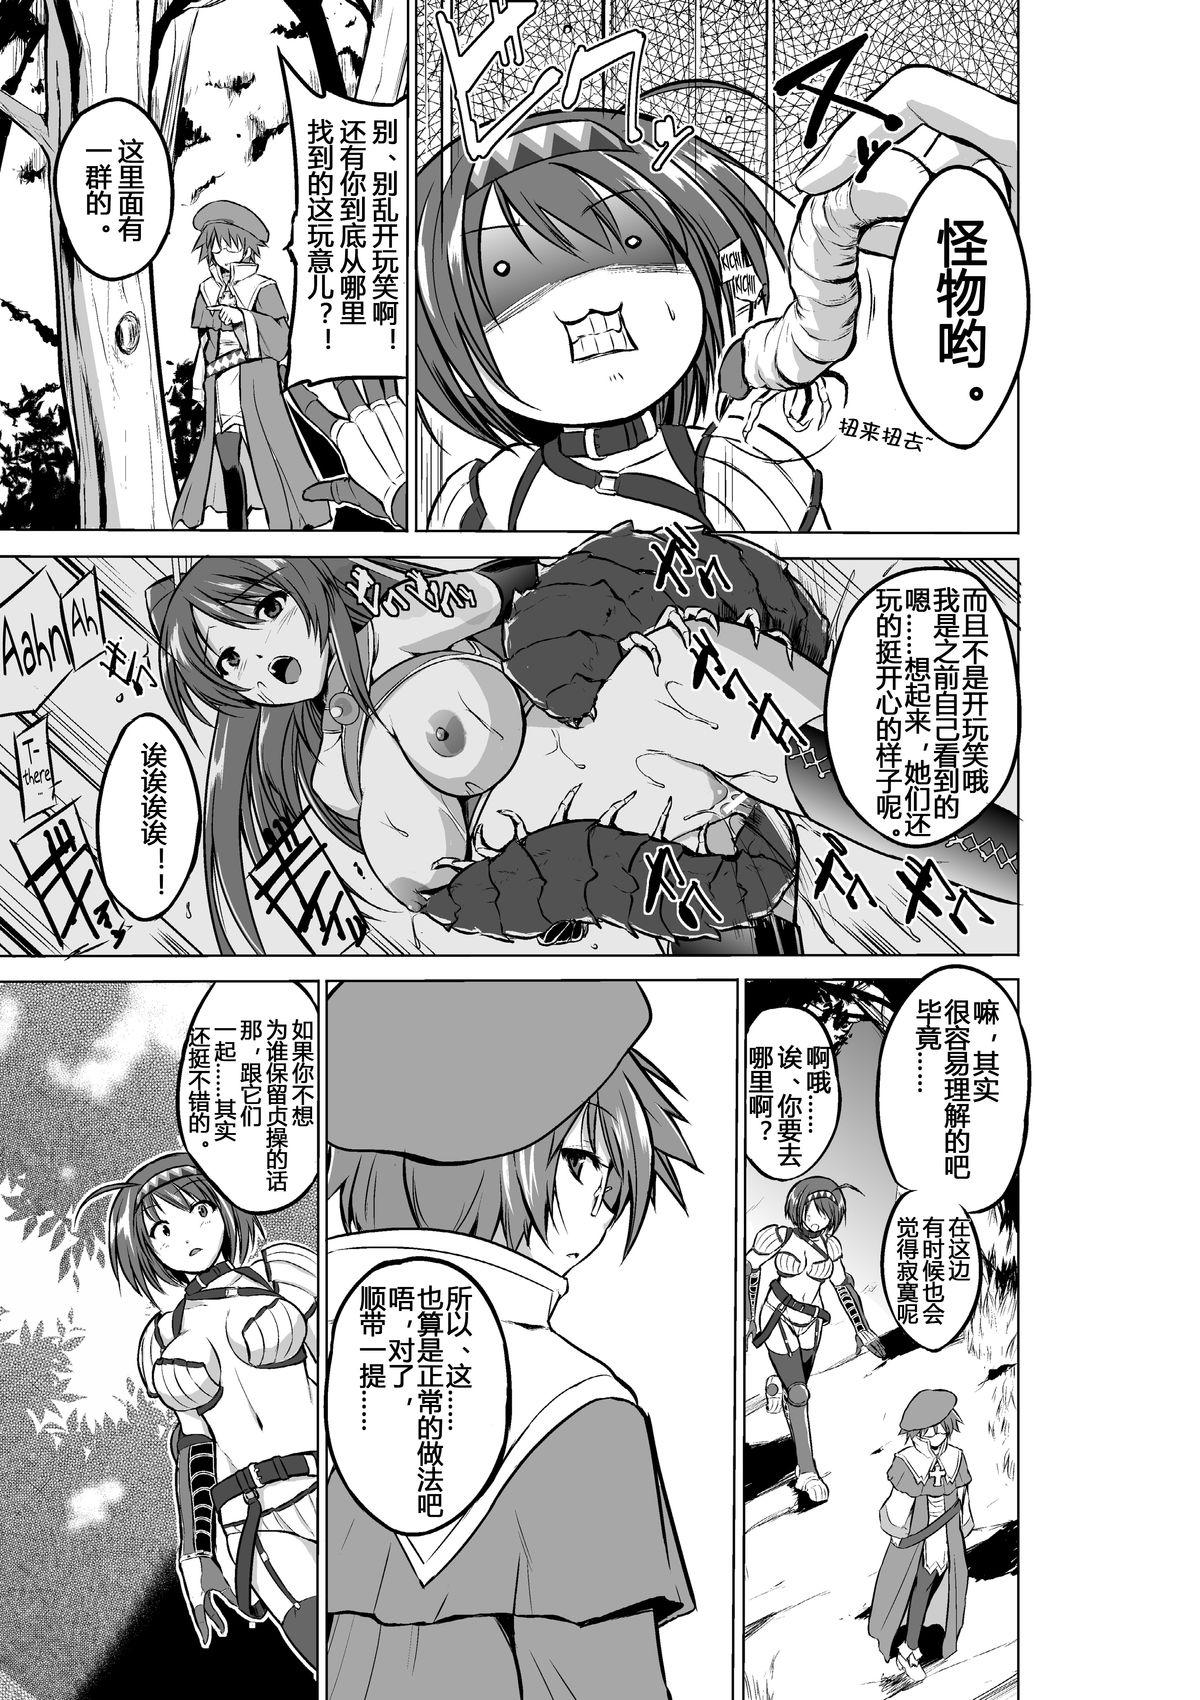 3some Dungeon Travelers - Chie no Himegoto - Toheart2 Doctor - Page 5